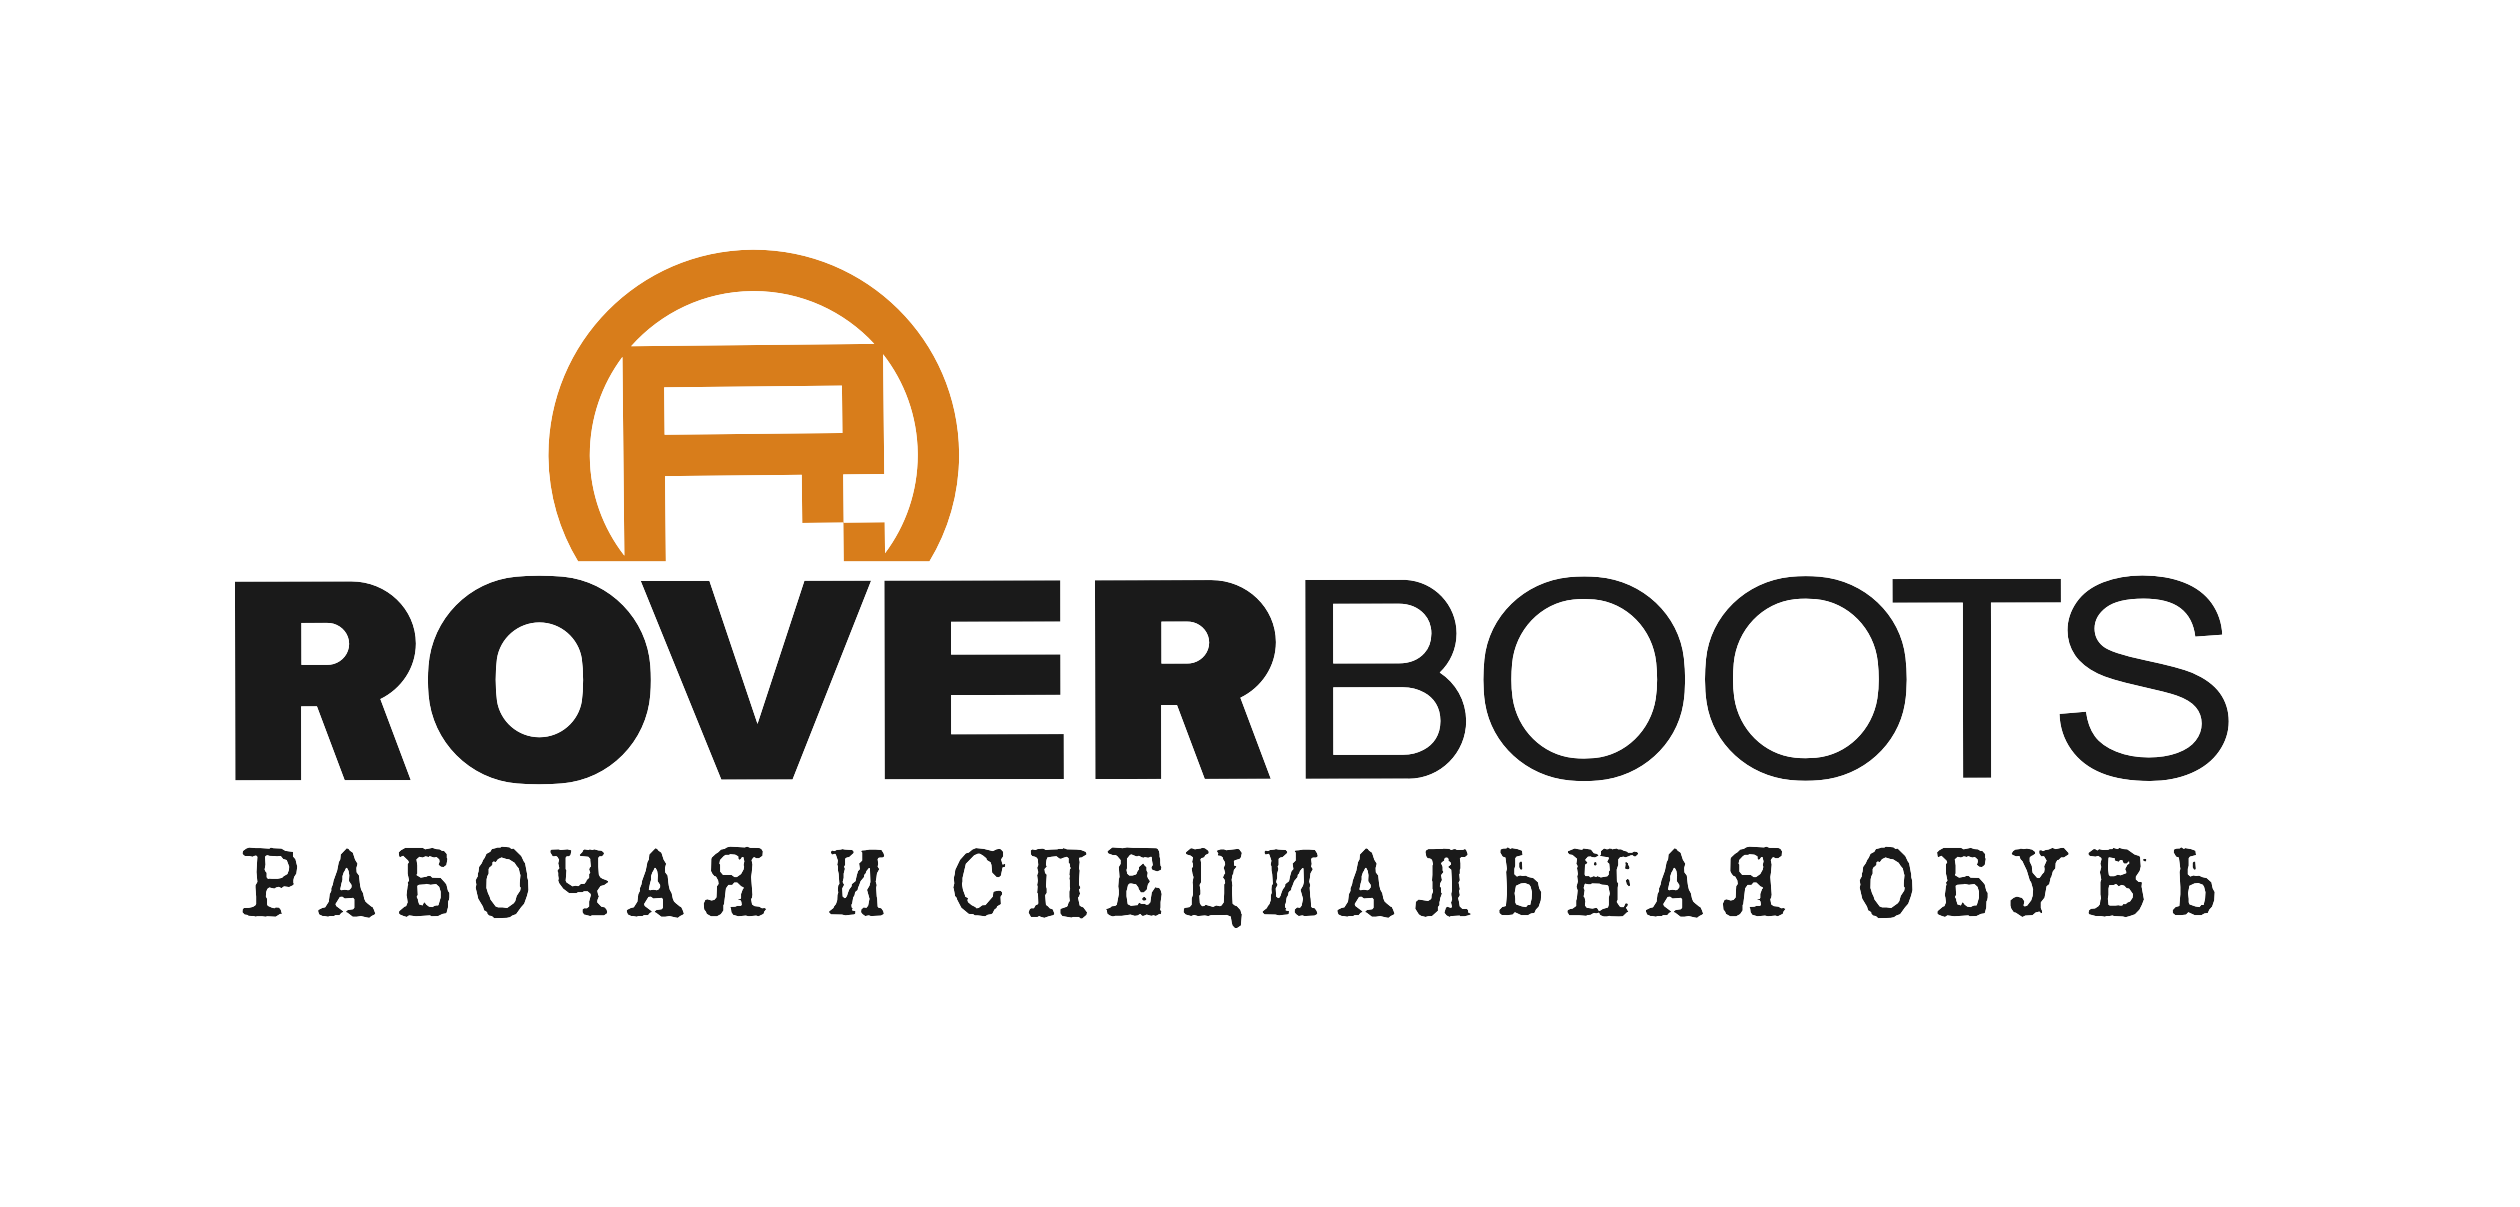 http://www.roverboots.com/